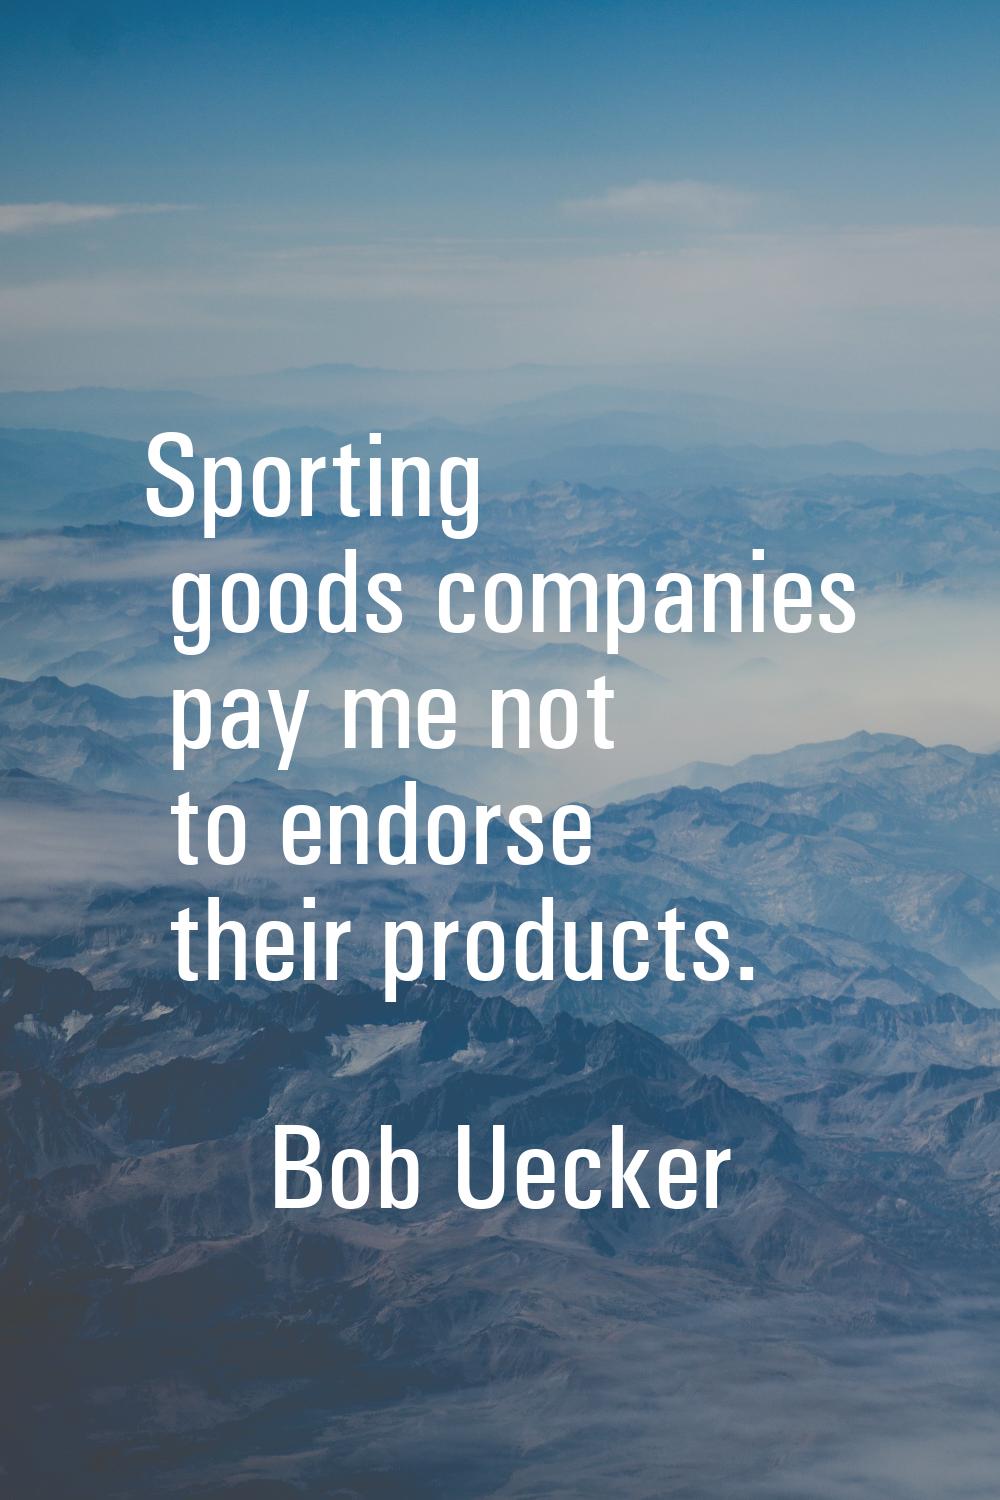 Sporting goods companies pay me not to endorse their products.